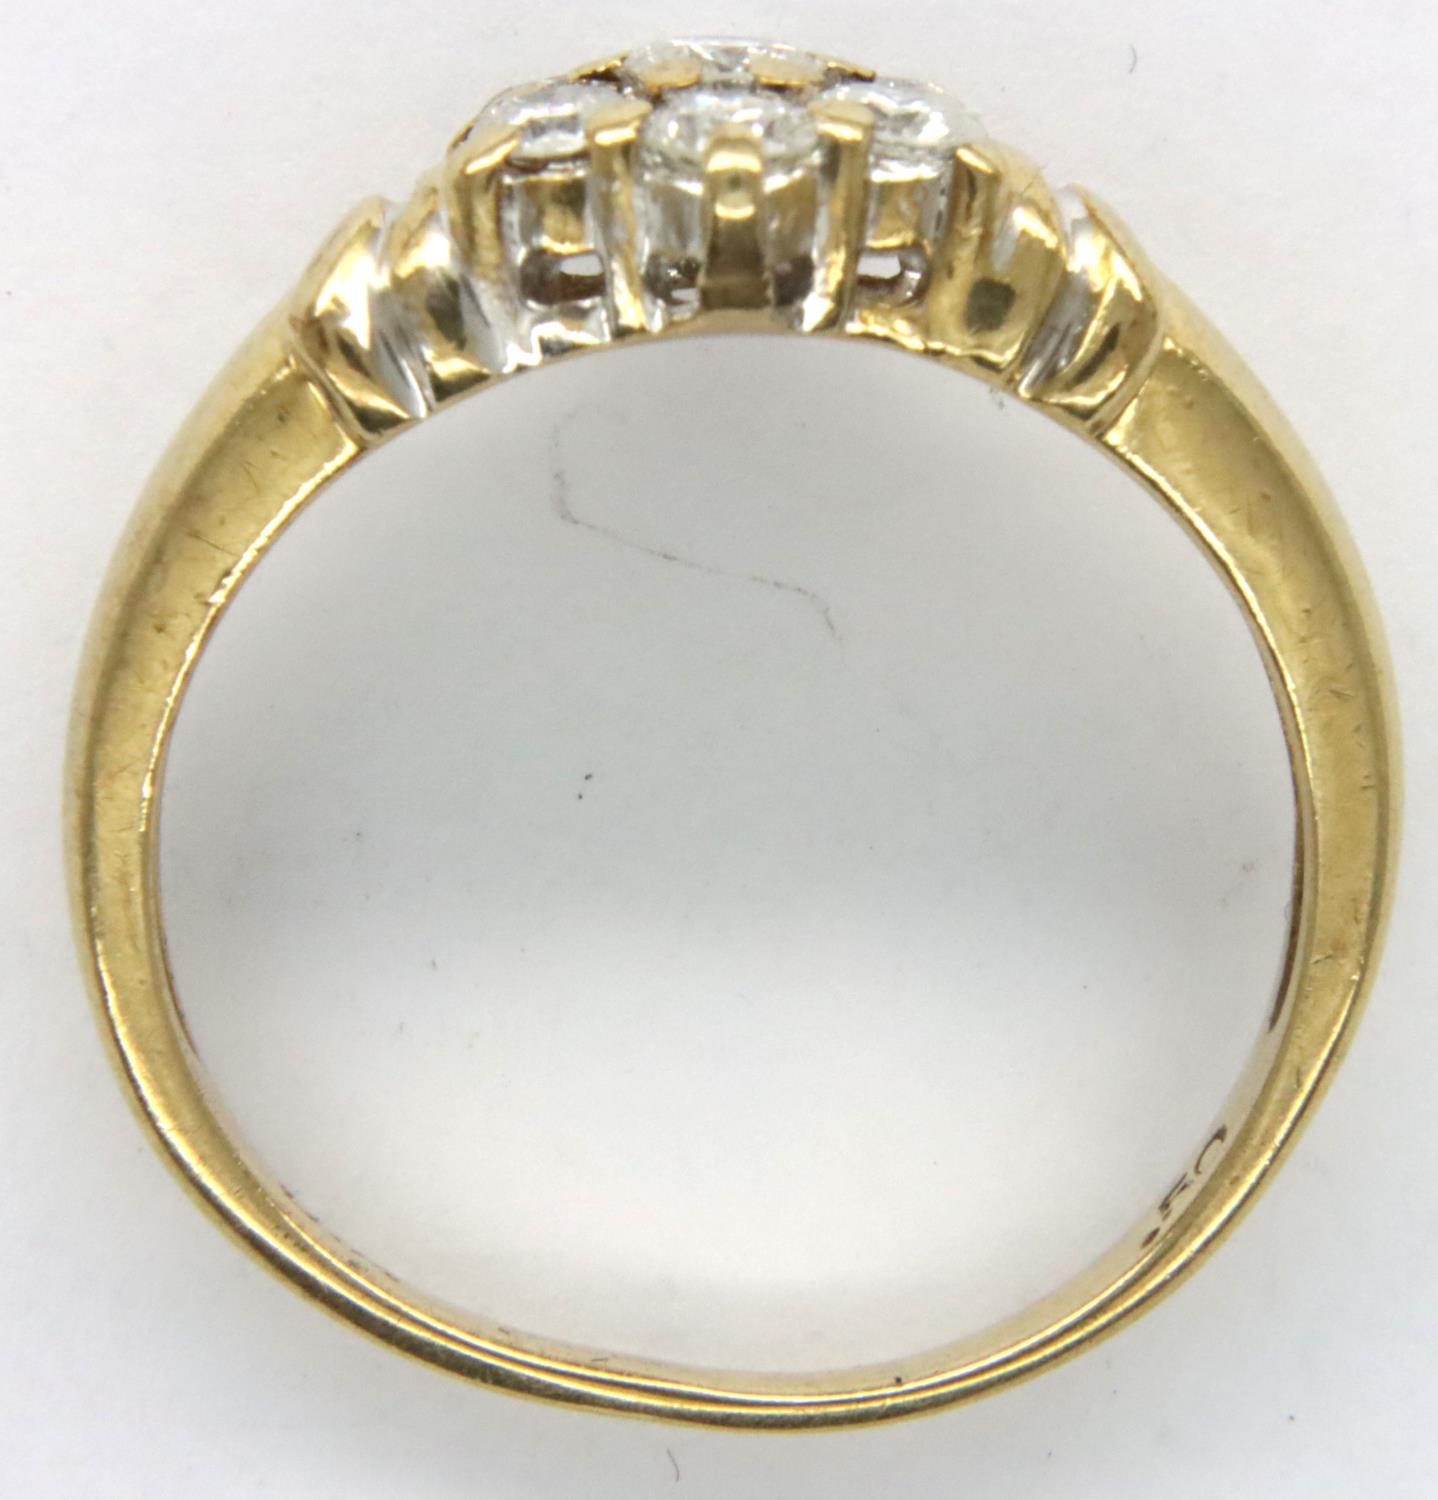 9ct gold and 0.5cts diamond daisy ring, size M/N, 2.7g. P&P Group 1 (£14+VAT for the first lot - Image 2 of 4